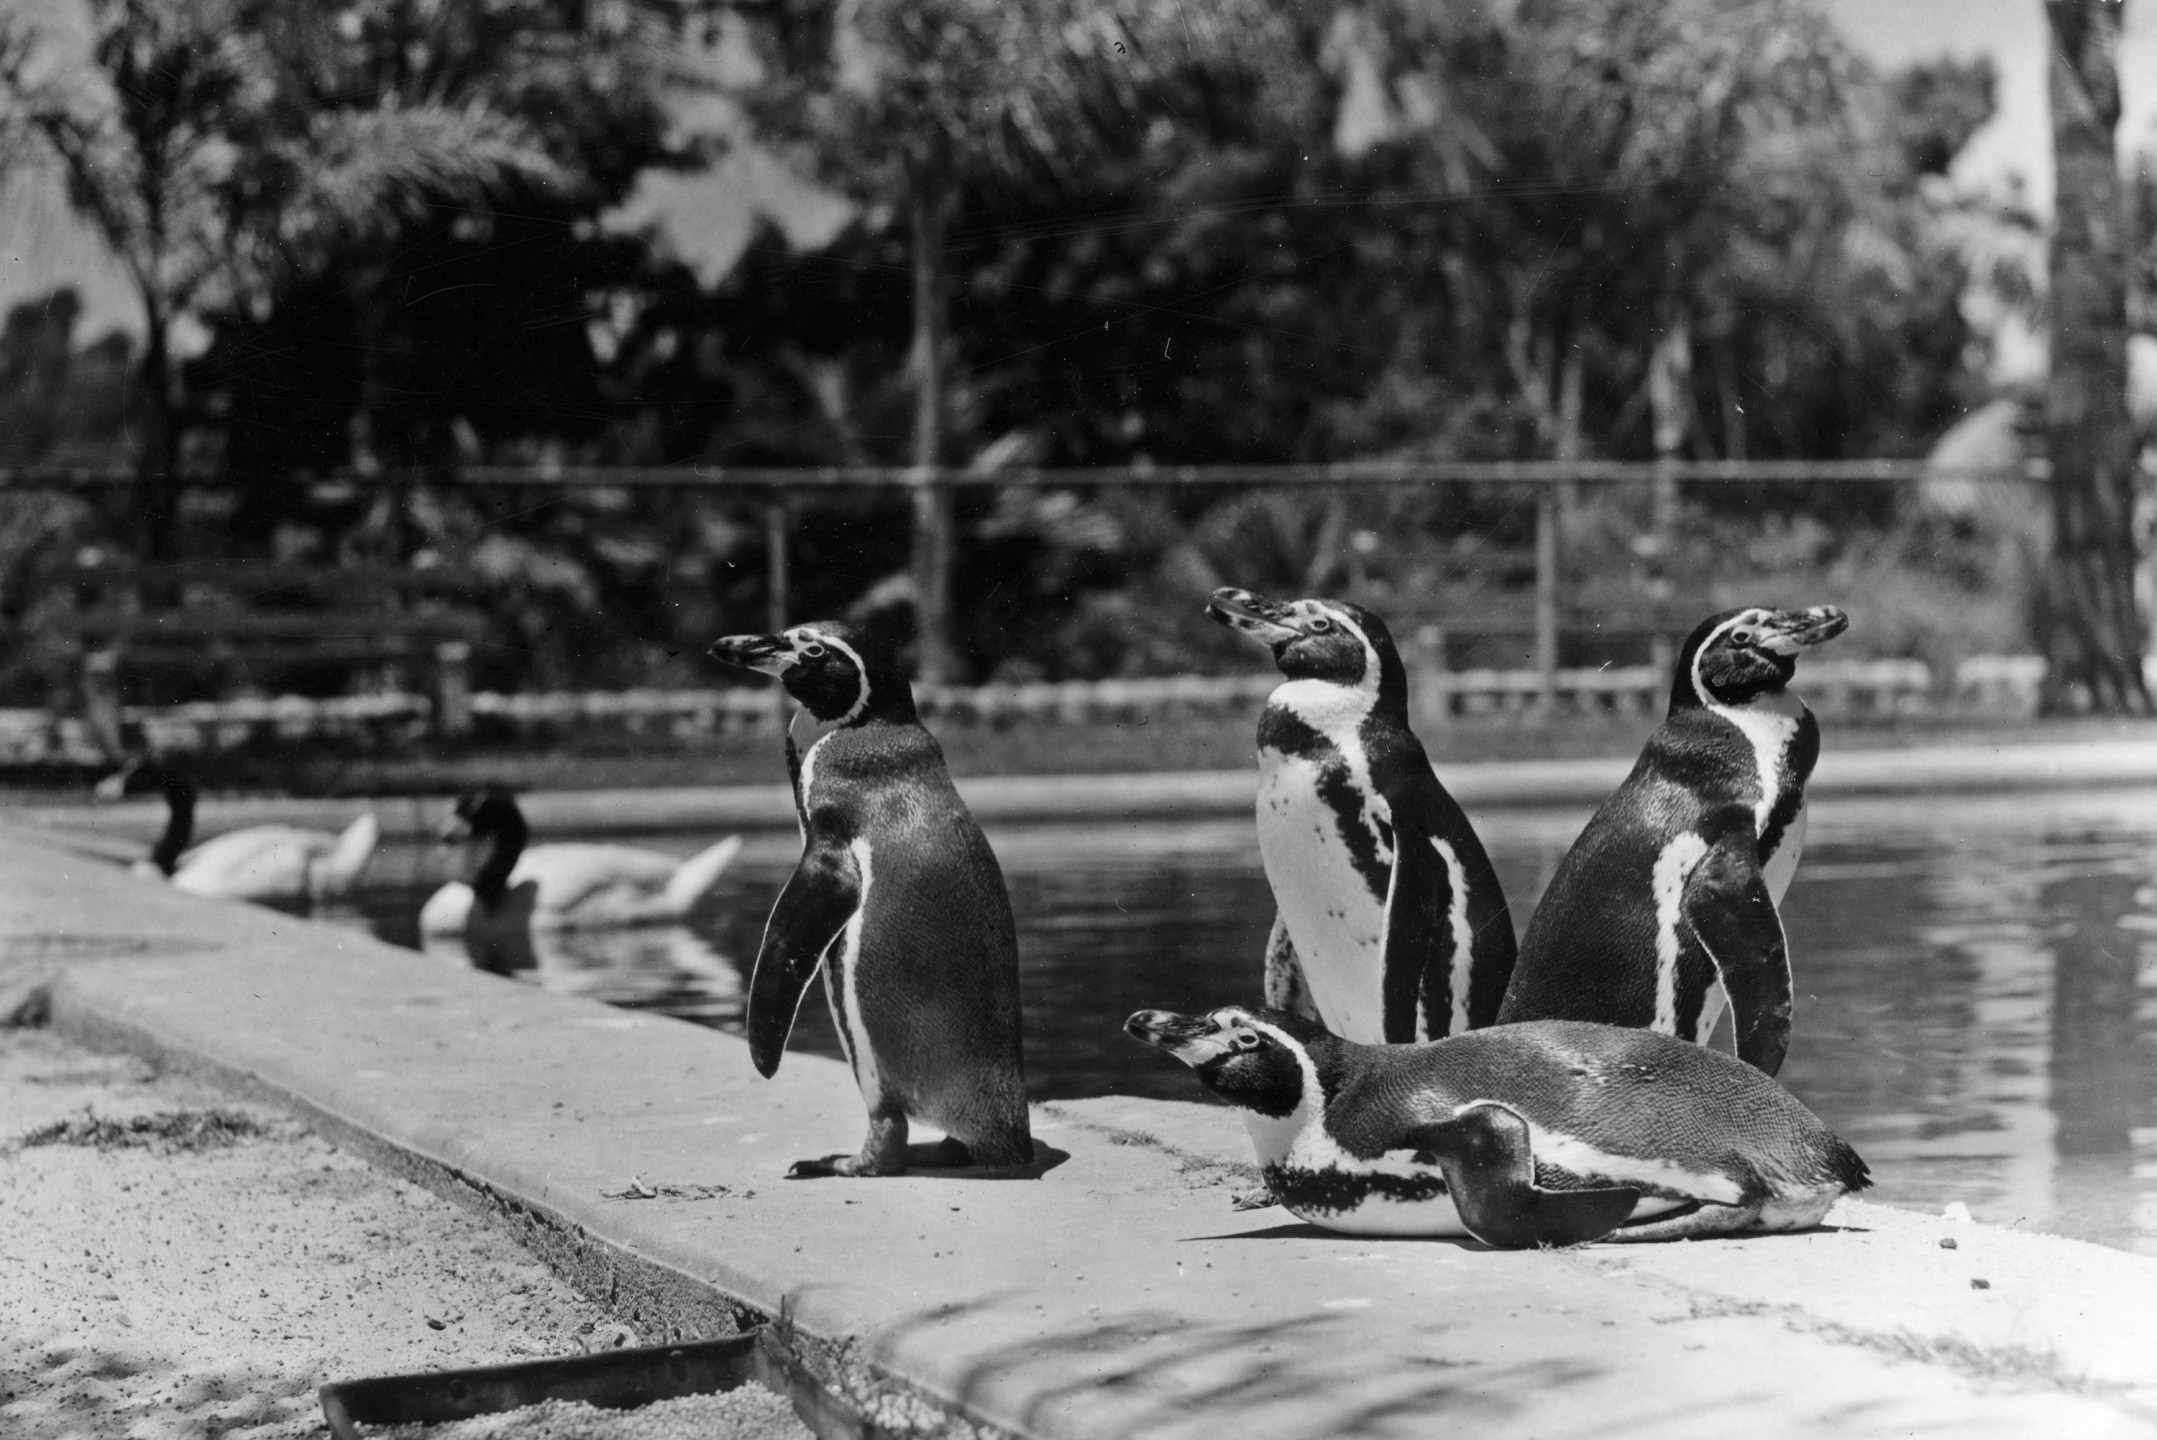 Isadore and Isabel, Humboldt's penguins